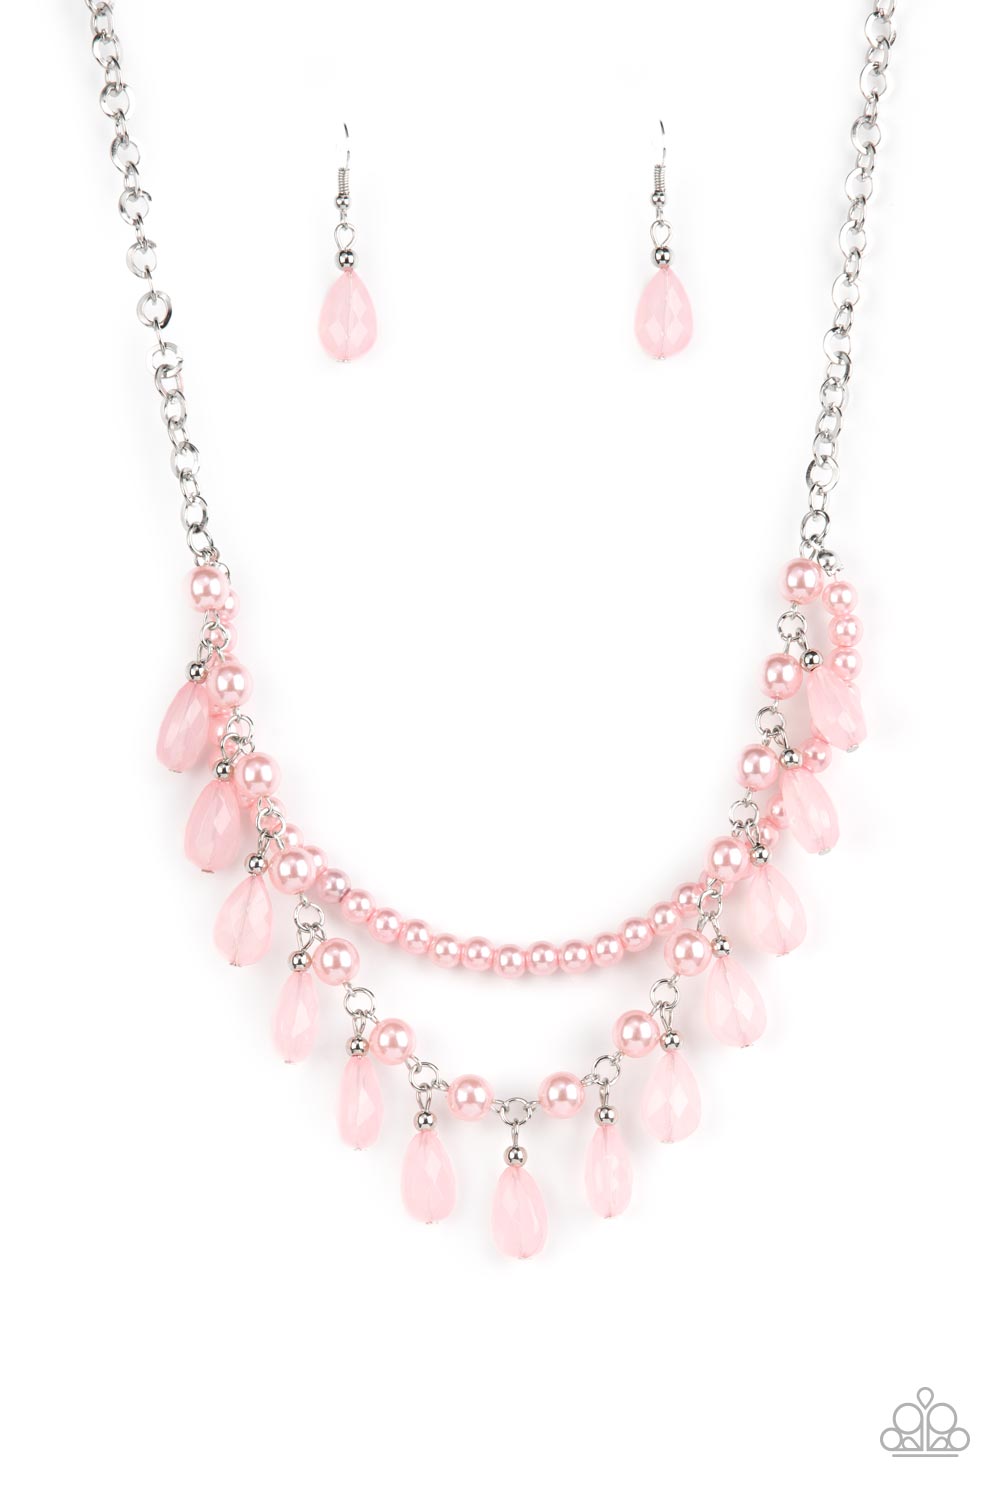 Dreamy Destination Wedding Paparazzi Accessories Necklace with Earrings - Pink